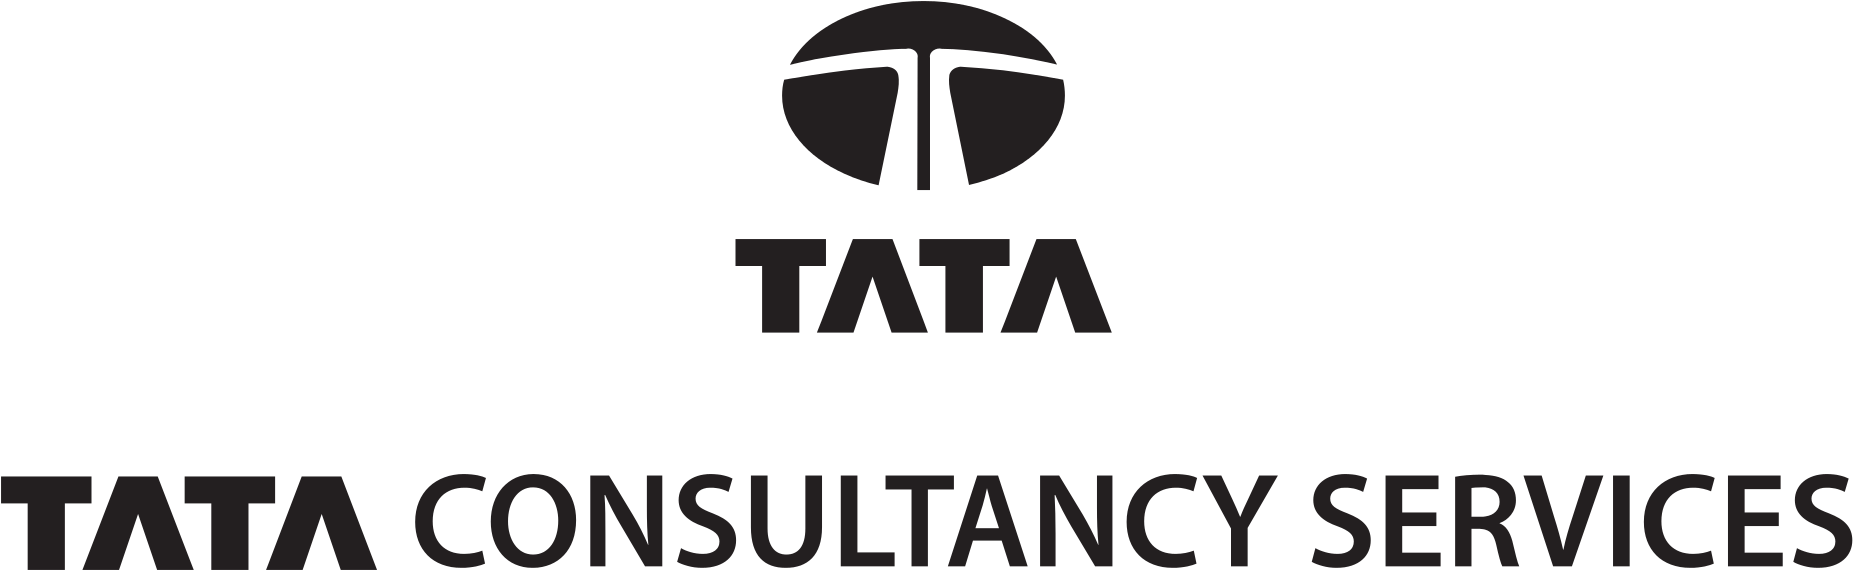 Tata Consultancy Services Logo PNG